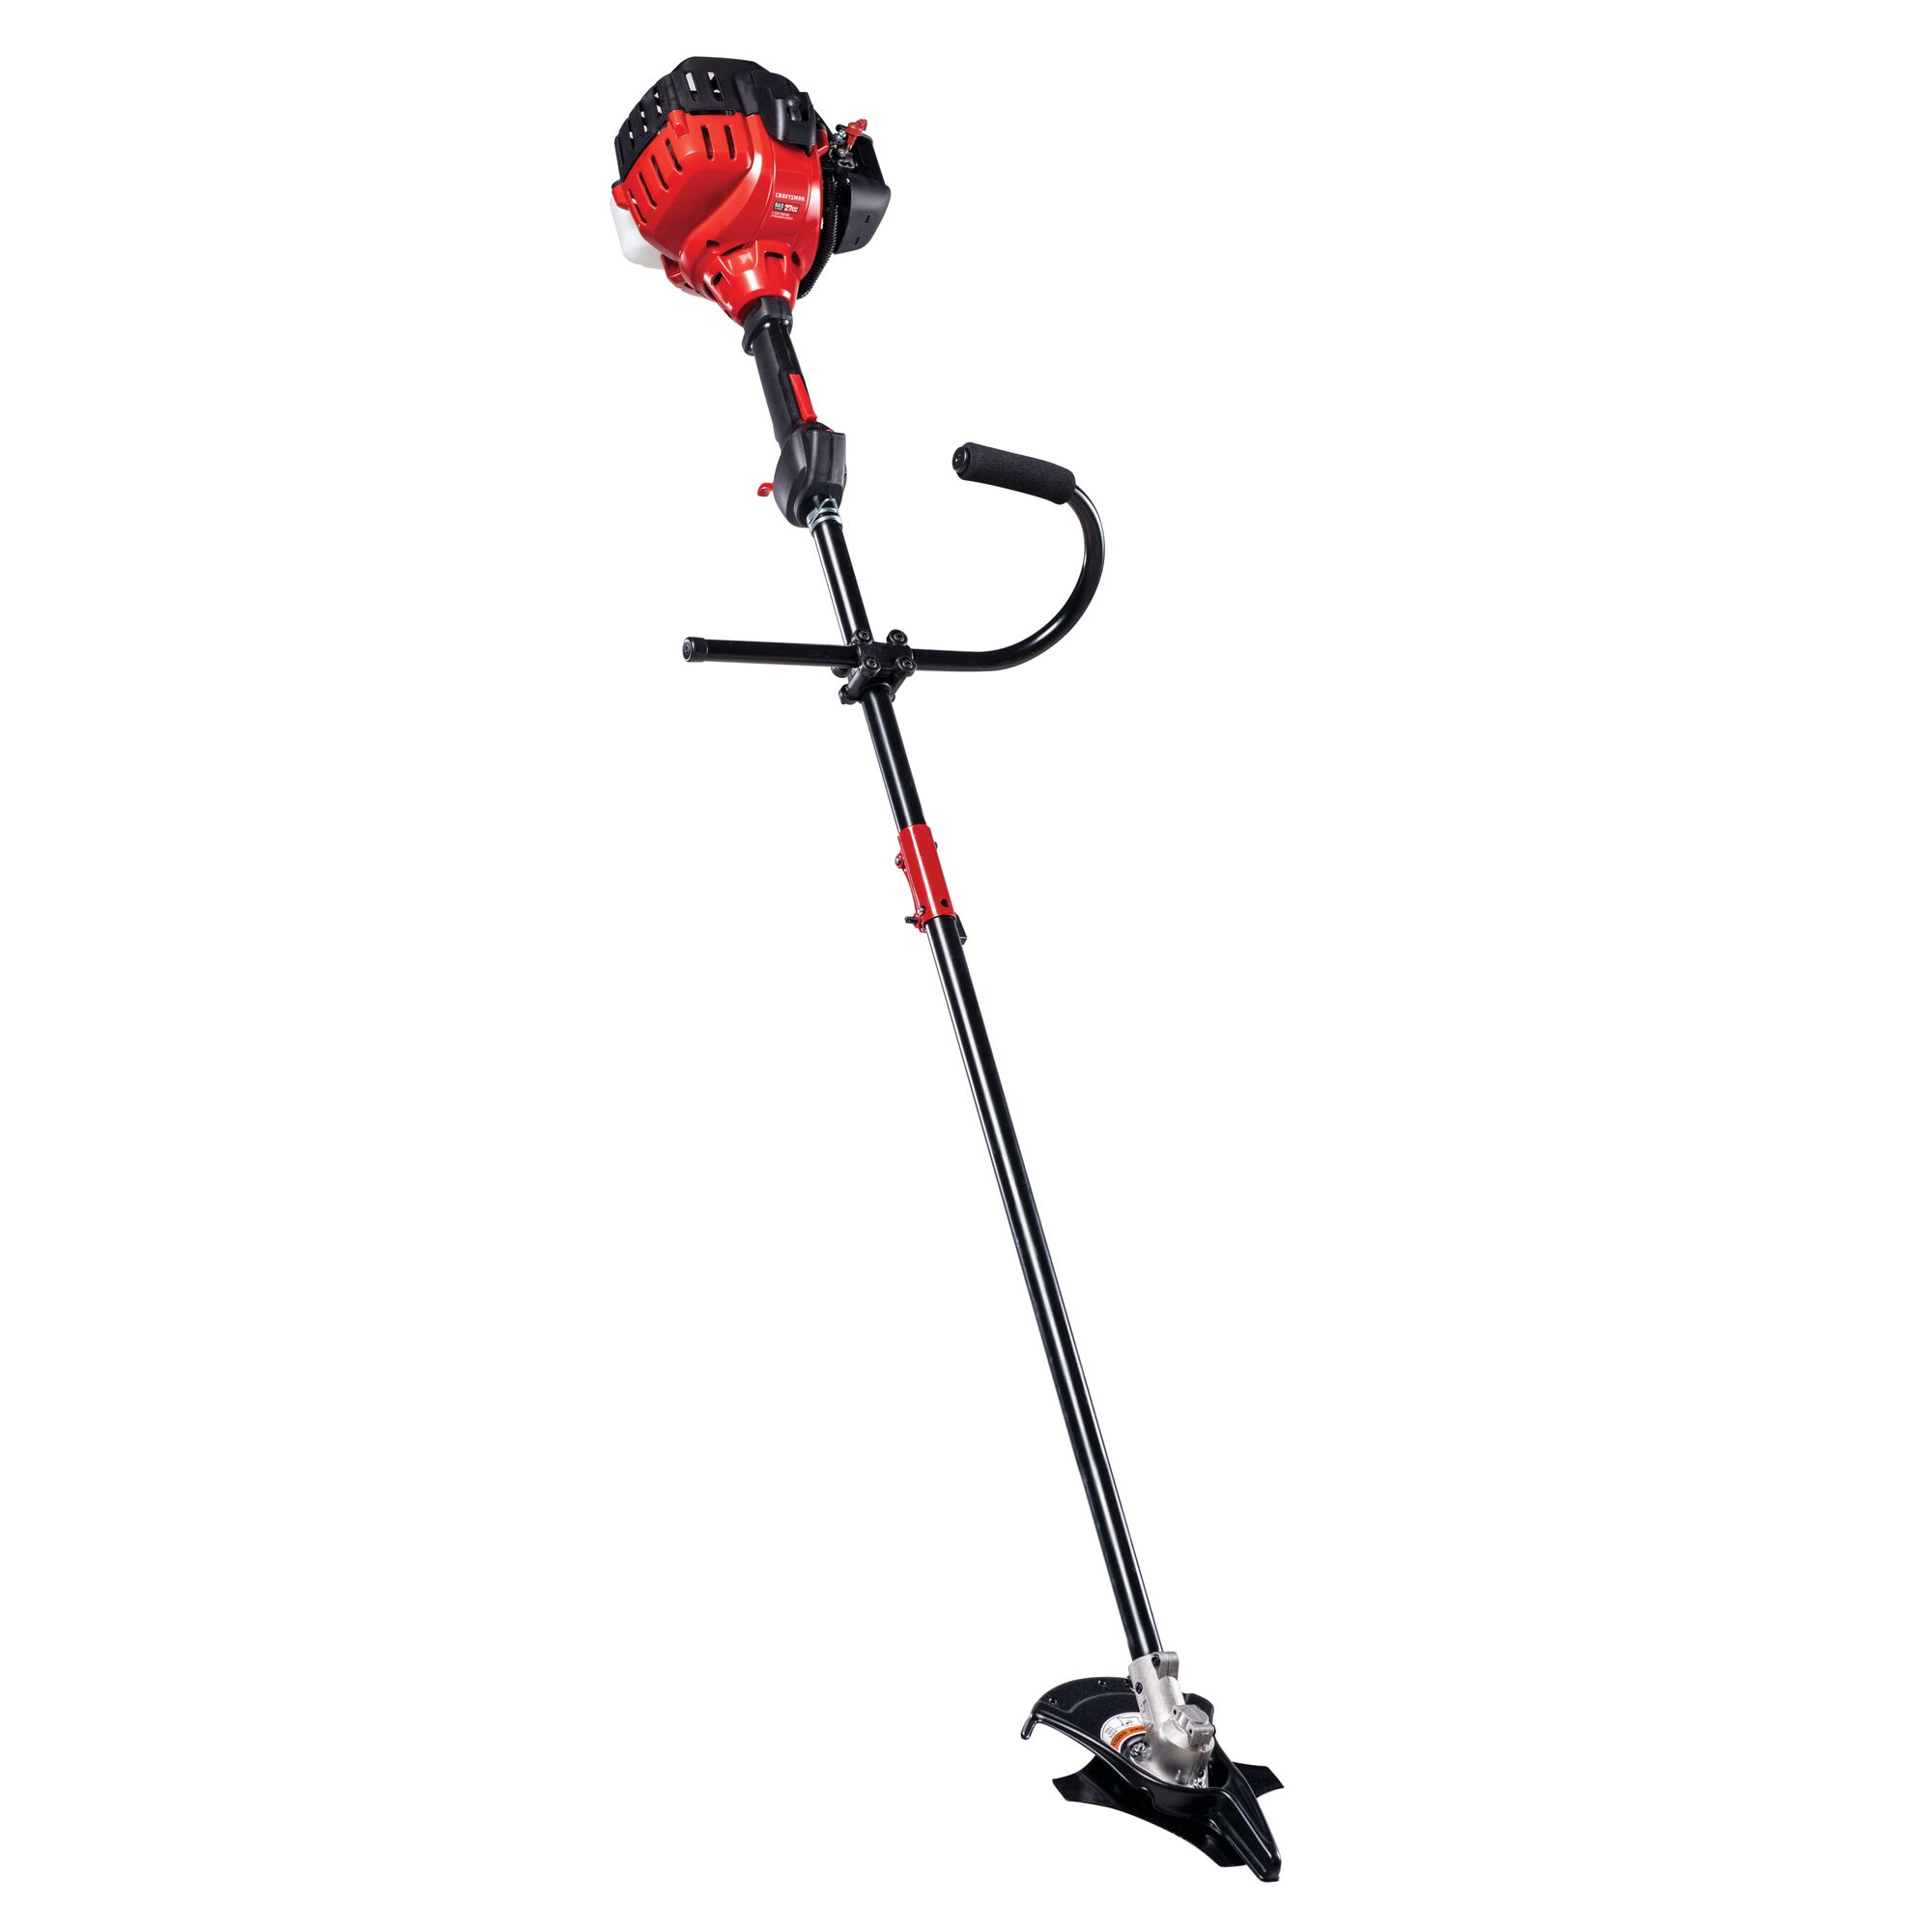 2 Cycle 18 inch attachment capable straight shaft brushcutter with bump head.